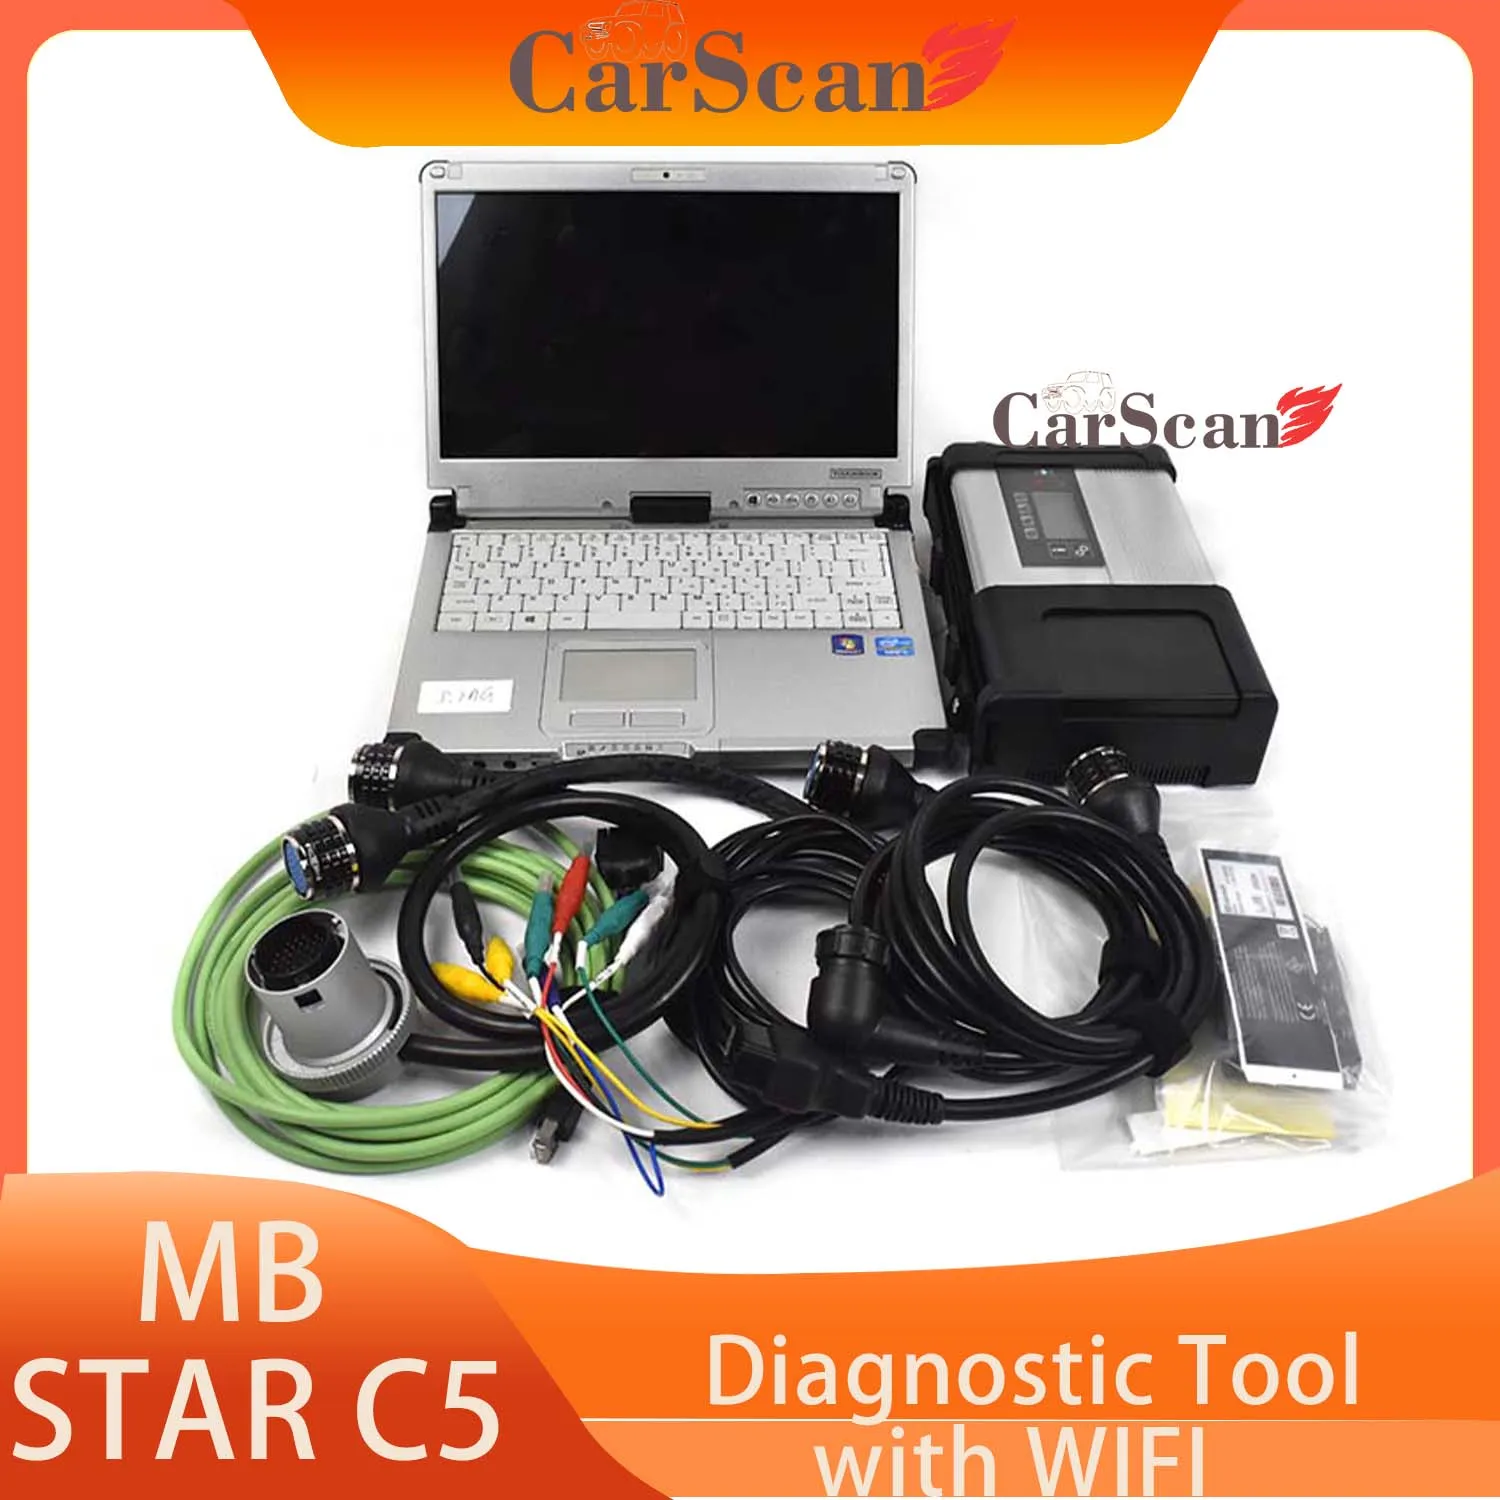 

2in1 Professional Auto Diagnostic Tools mb star c5 icom a2 diagnosis 1tb SSD cables and Multiplexer and CFC2 laptop